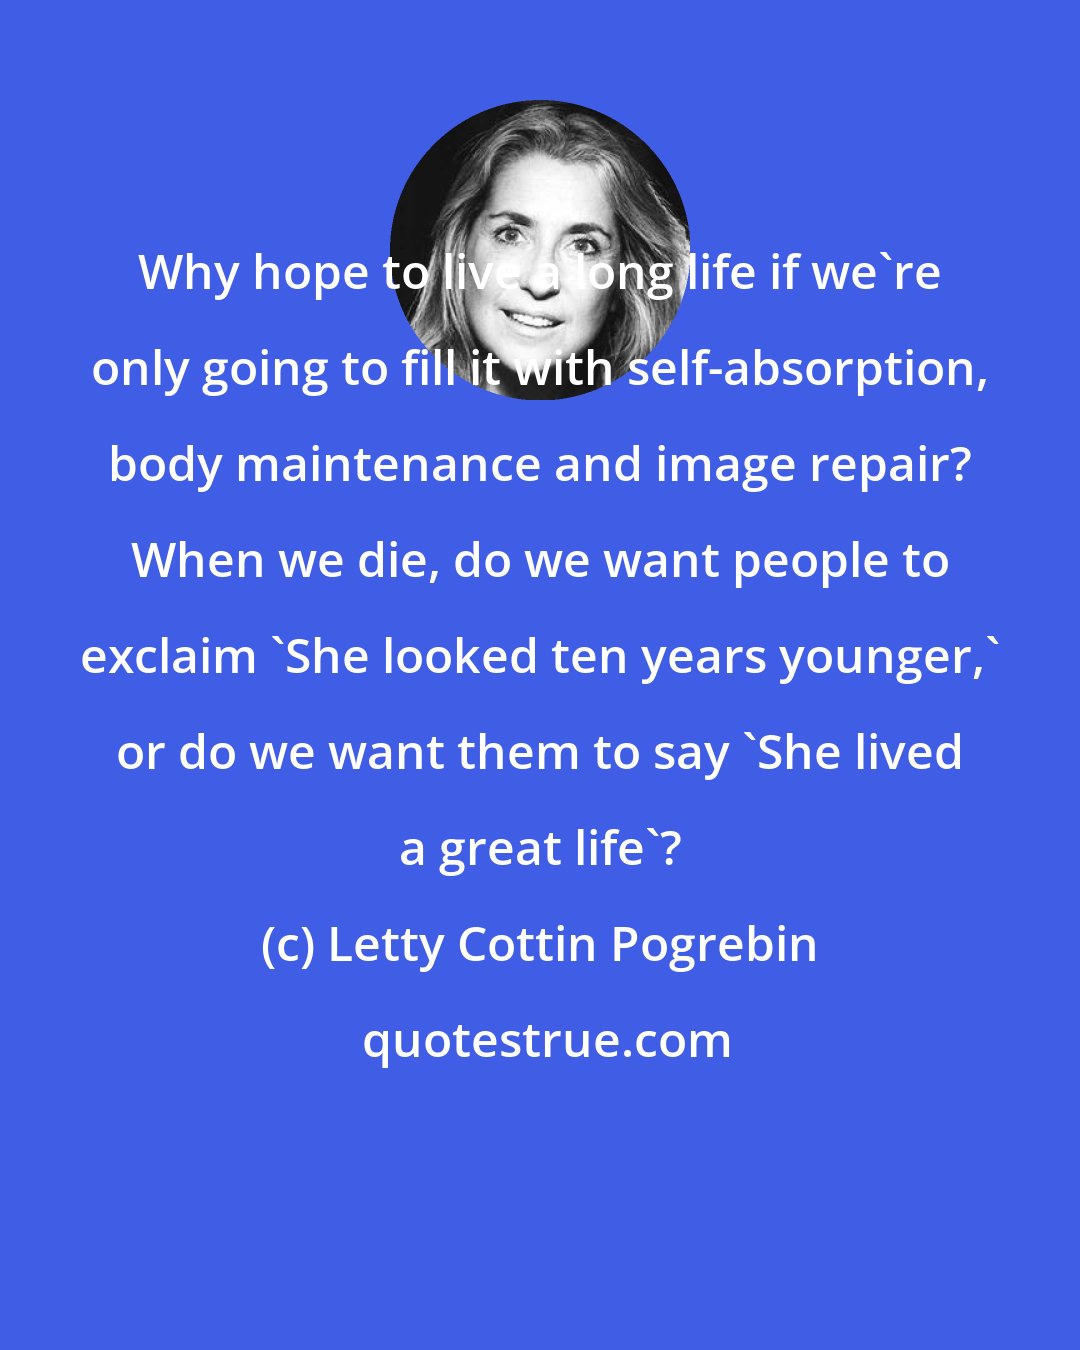 Letty Cottin Pogrebin: Why hope to live a long life if we're only going to fill it with self-absorption, body maintenance and image repair? When we die, do we want people to exclaim 'She looked ten years younger,' or do we want them to say 'She lived a great life'?